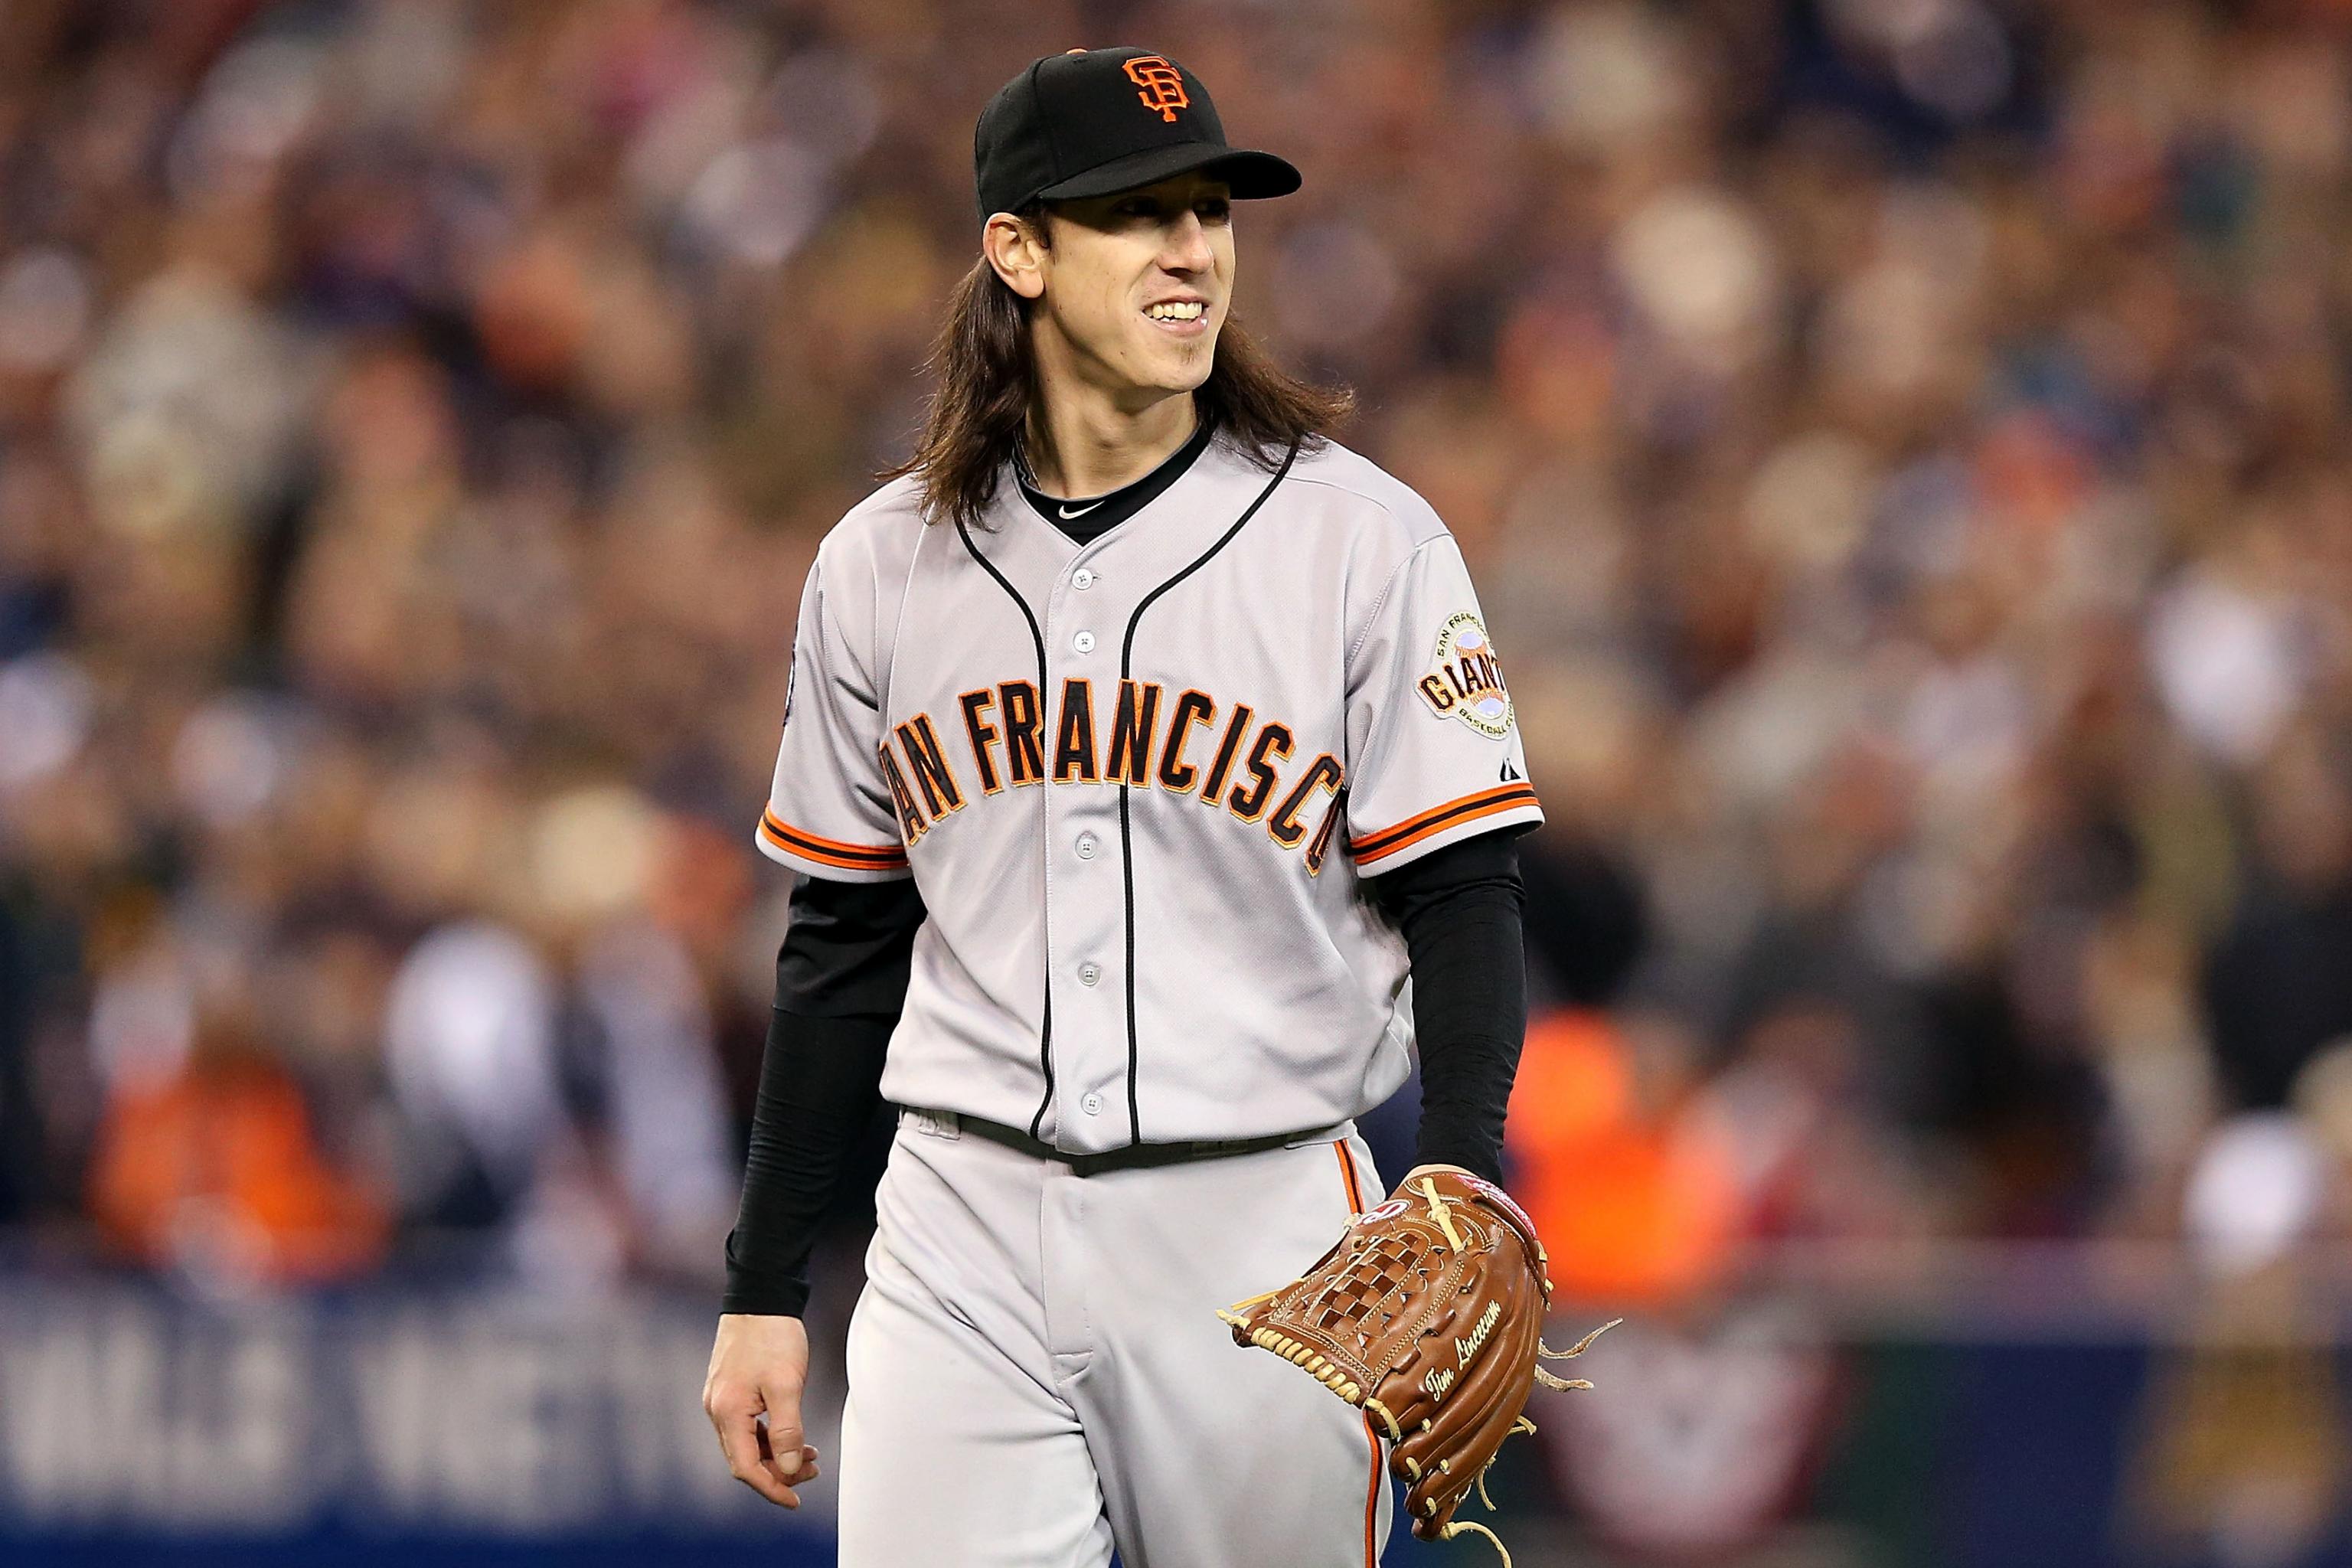 Tim Lincecum: How Will the San Francisco Giants Pitcher Perform in